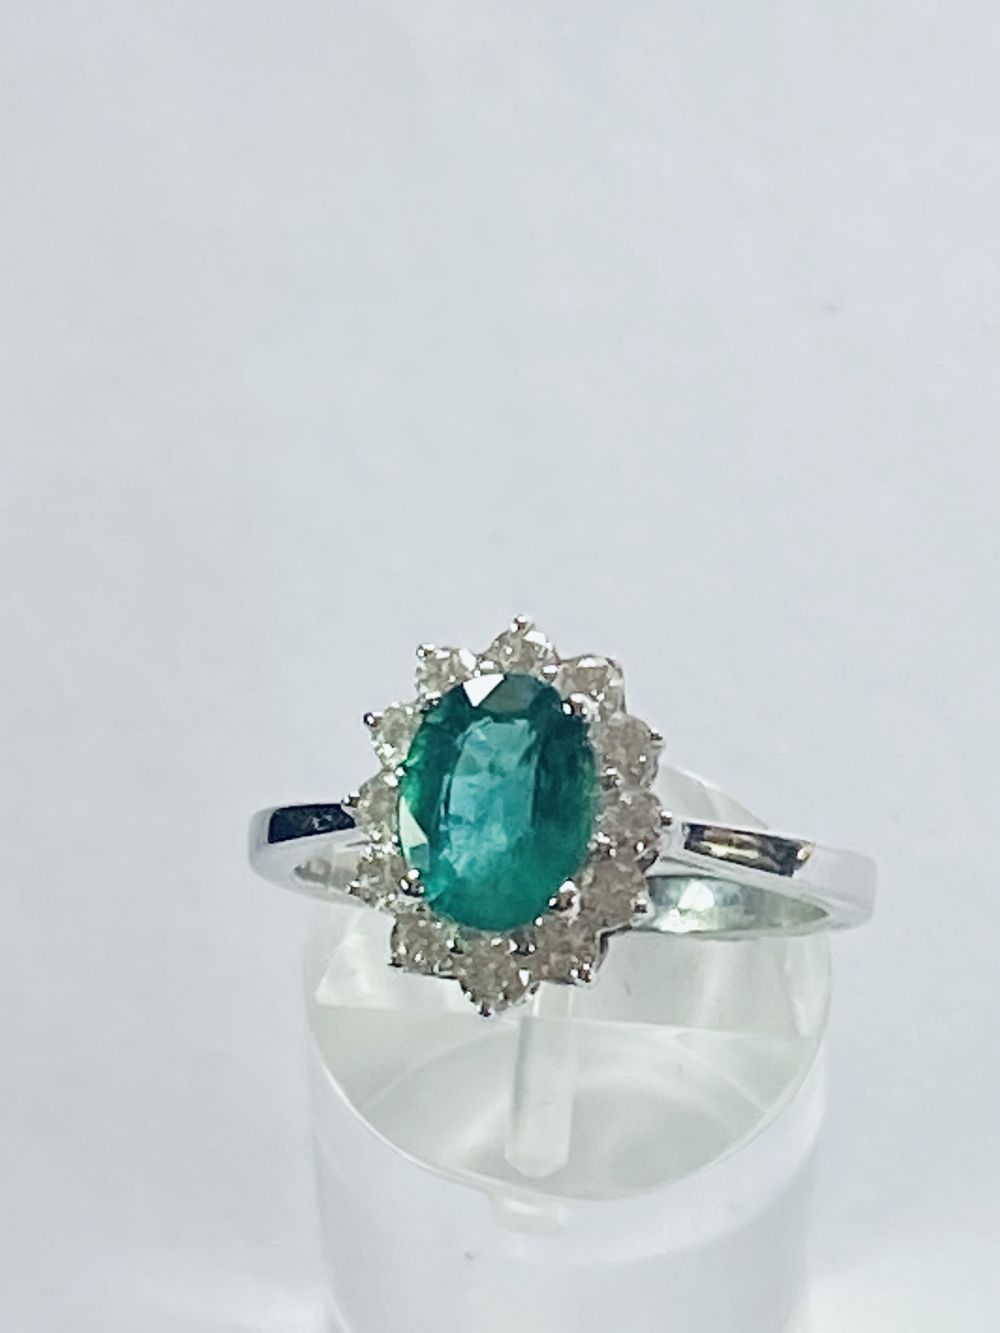 COLUMBIAN EMERALD AND DIAMOND CLUSTER RING - Image 7 of 8